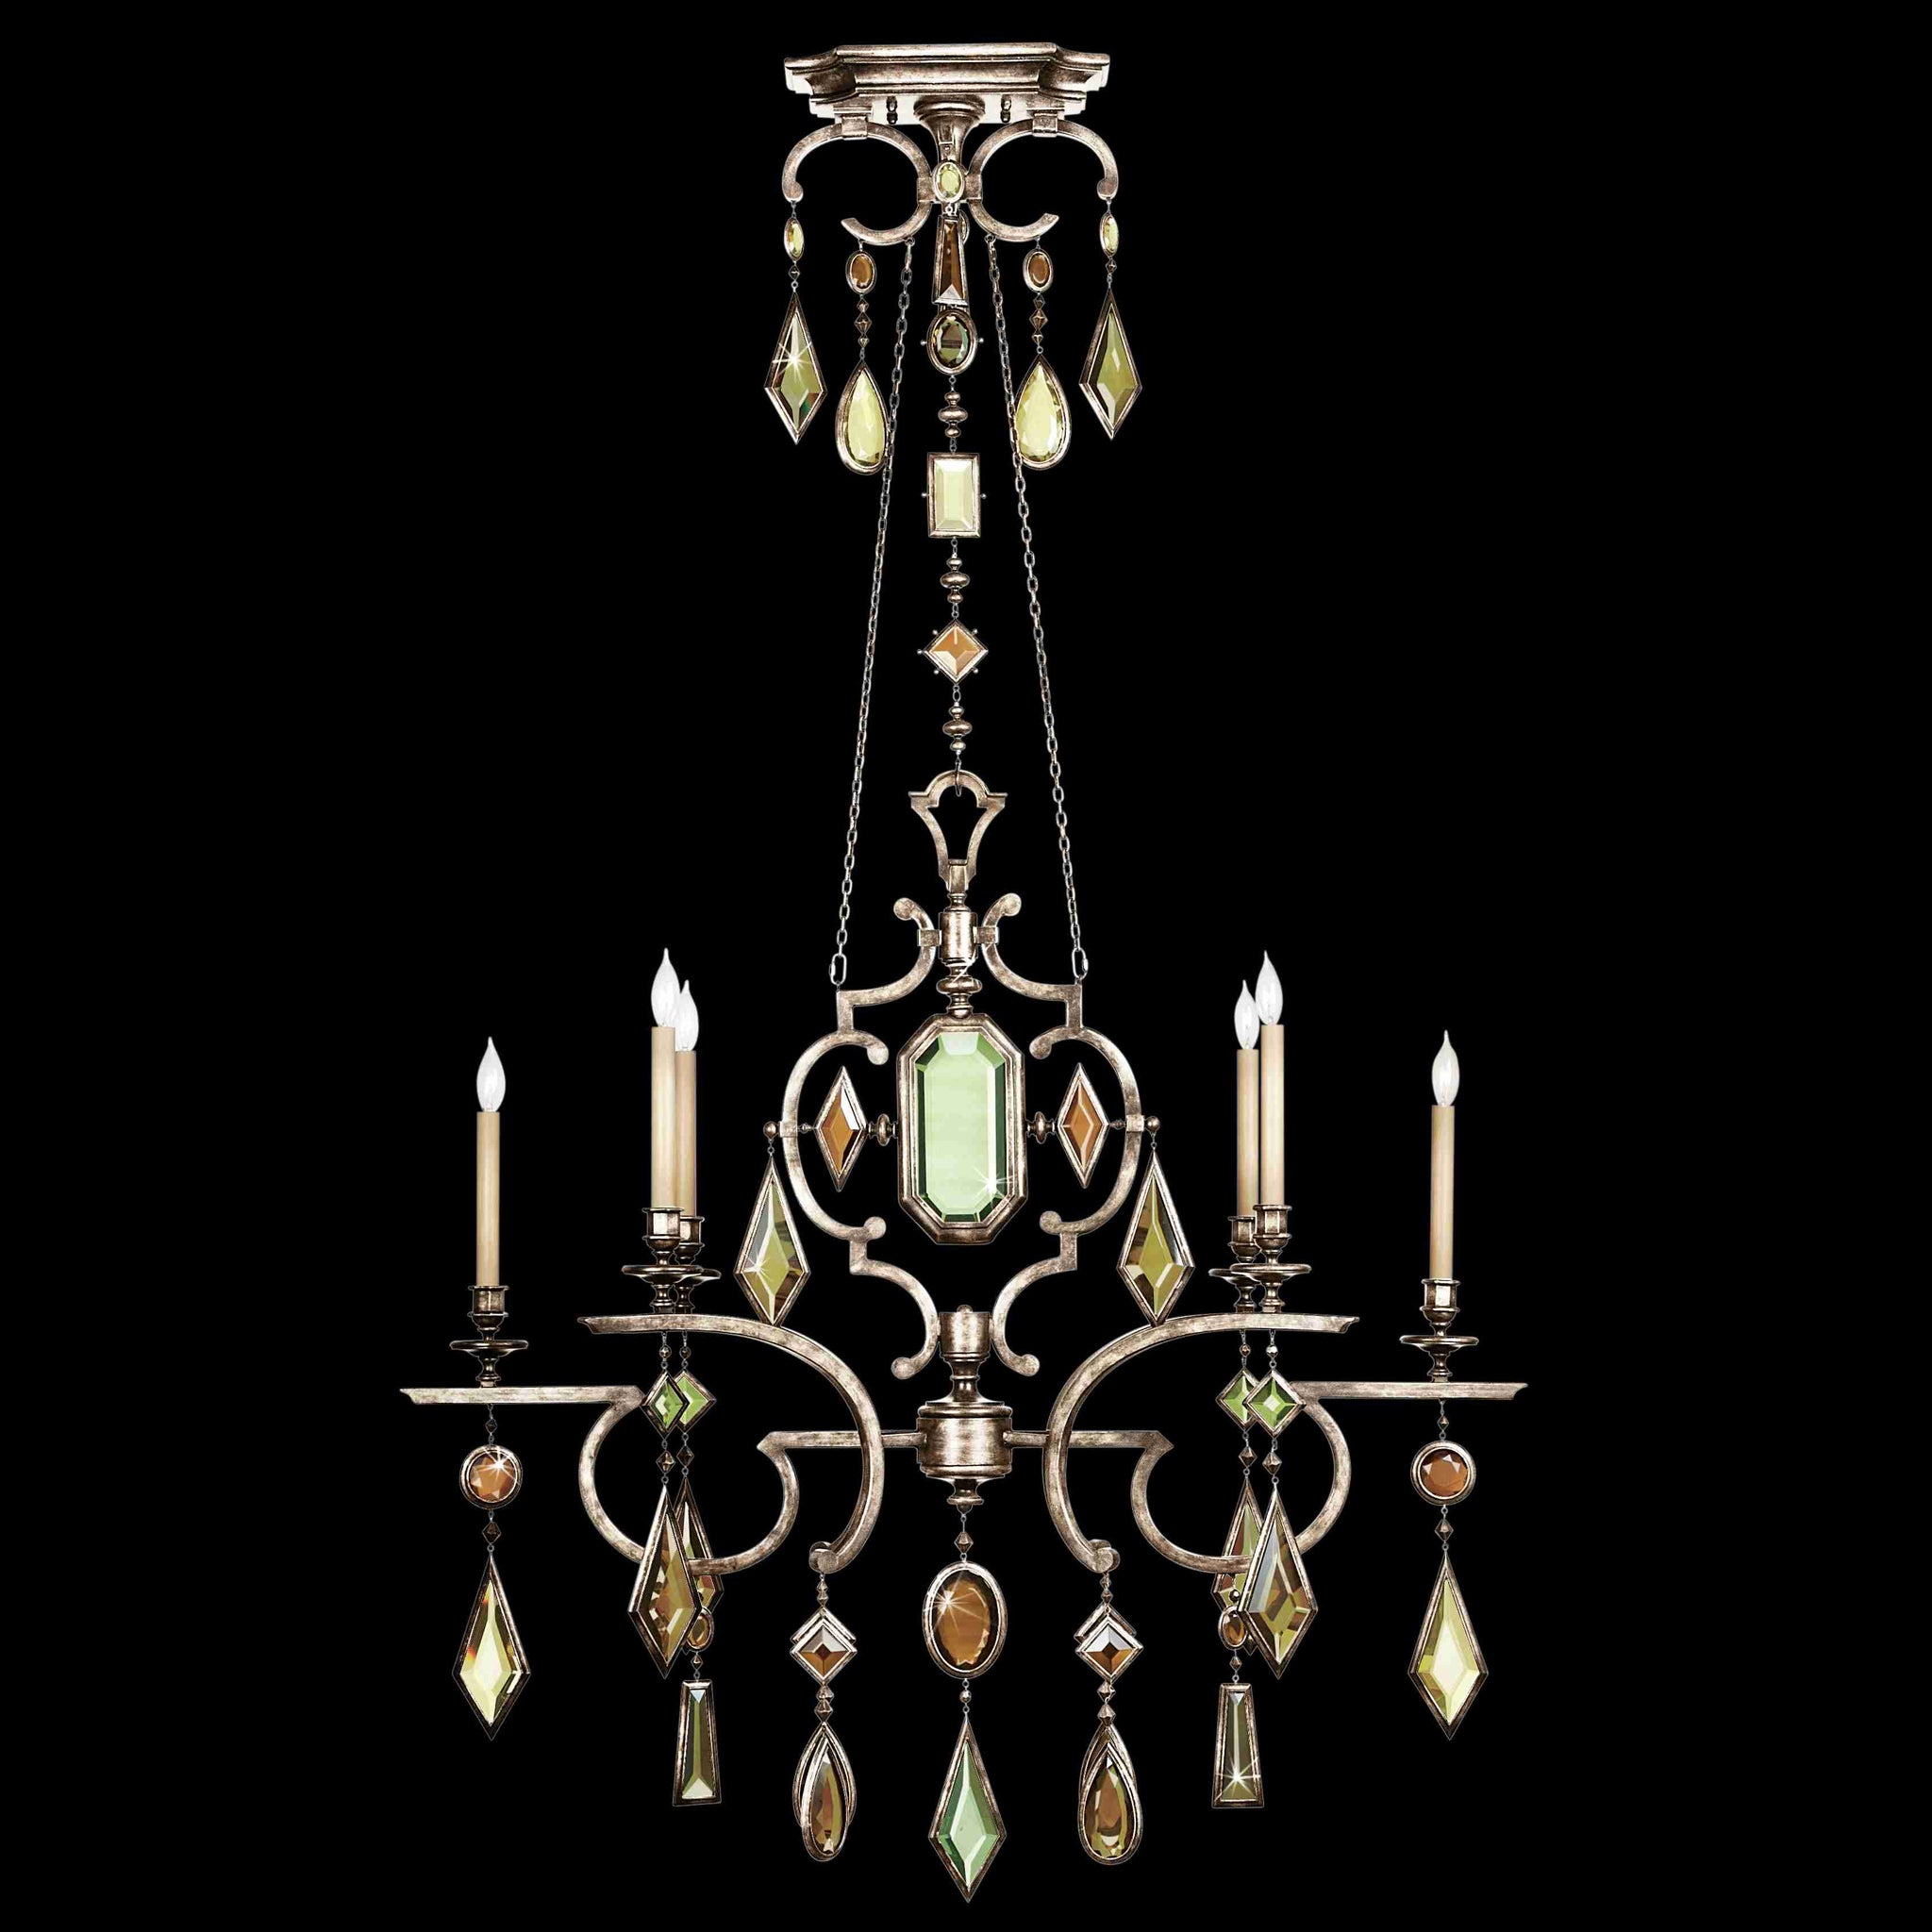 Encased Gems Chandelier Silver with Multi-Colored Gems